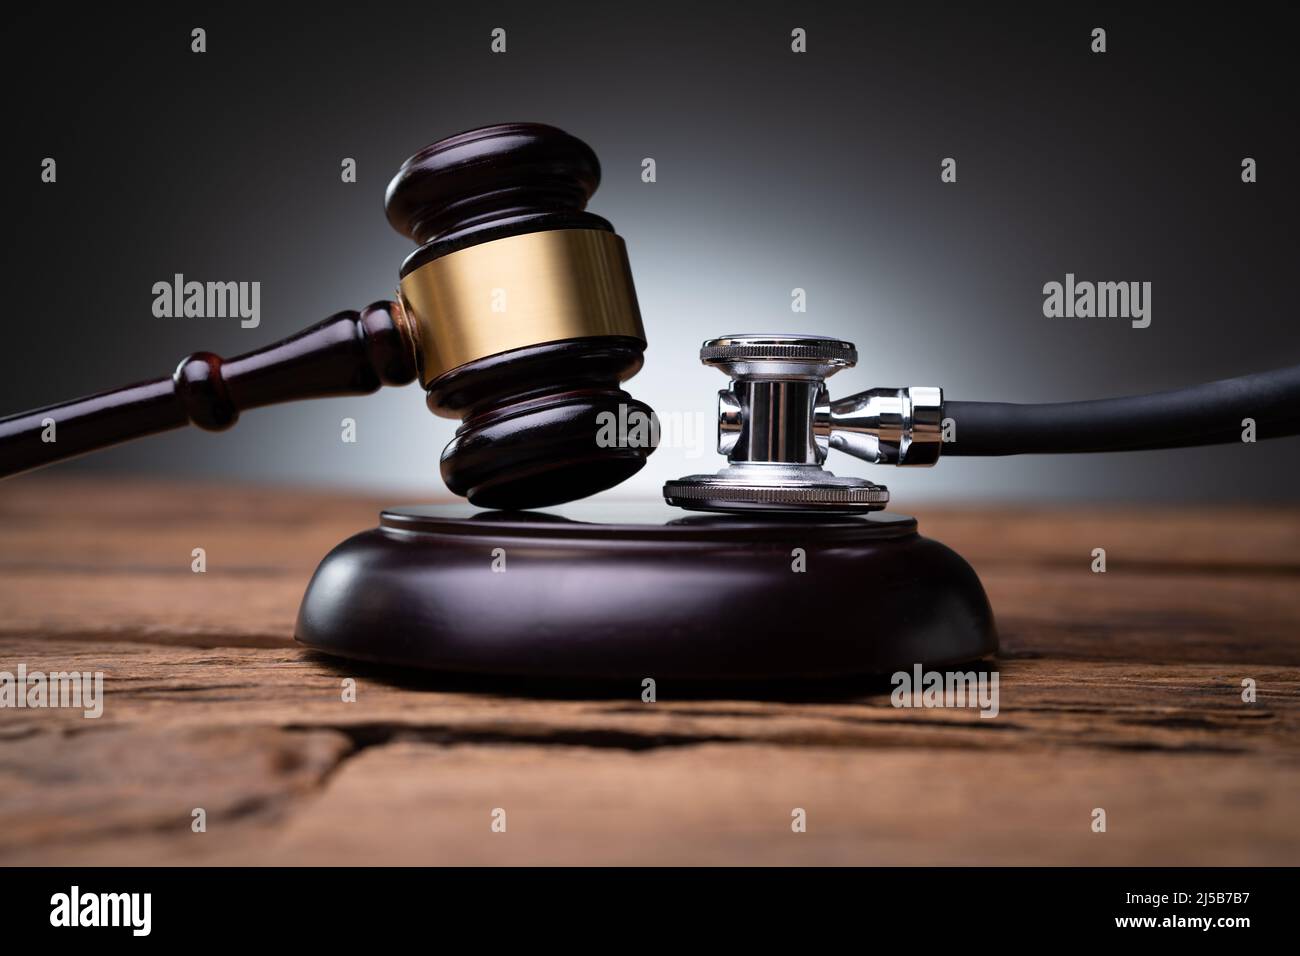 Medical Malpractice And Power Of Attorney. Law And Legislation Stock Photo